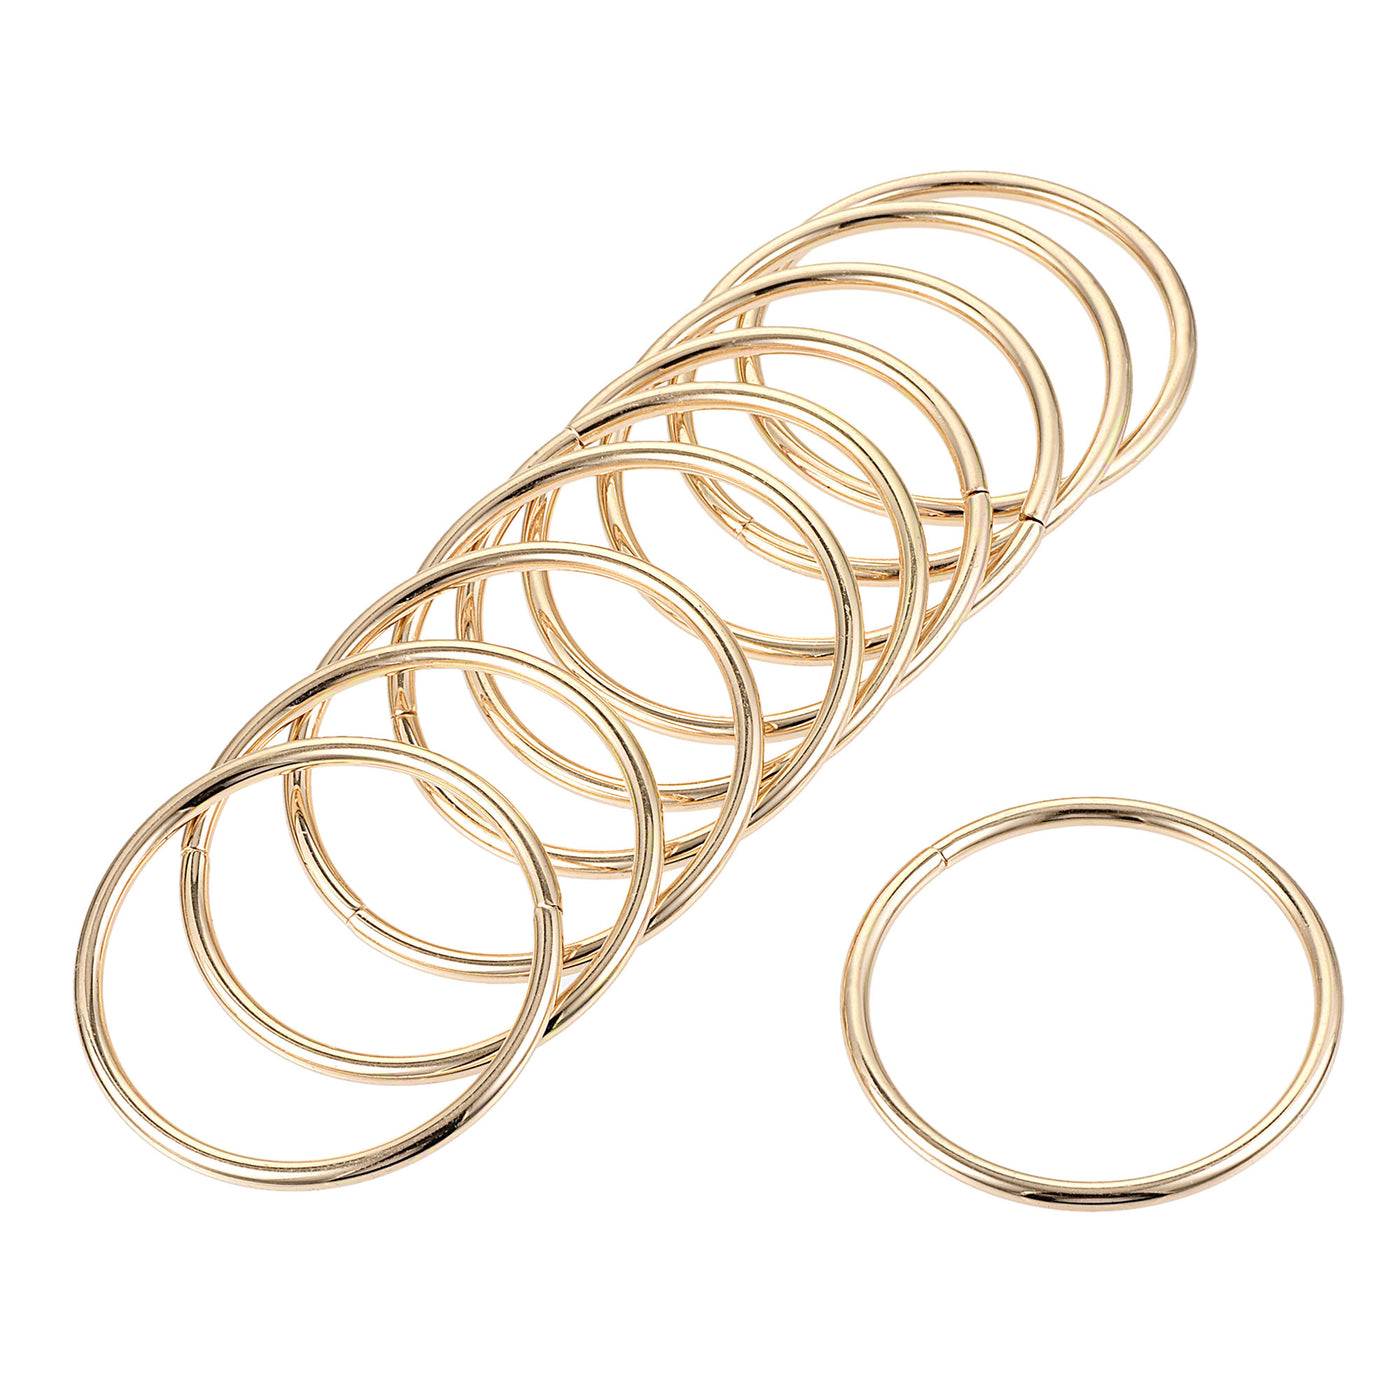 uxcell Uxcell 50mm Metal O Rings Non-Welded for Straps Bags Belts DIY Gold Tone 10pcs